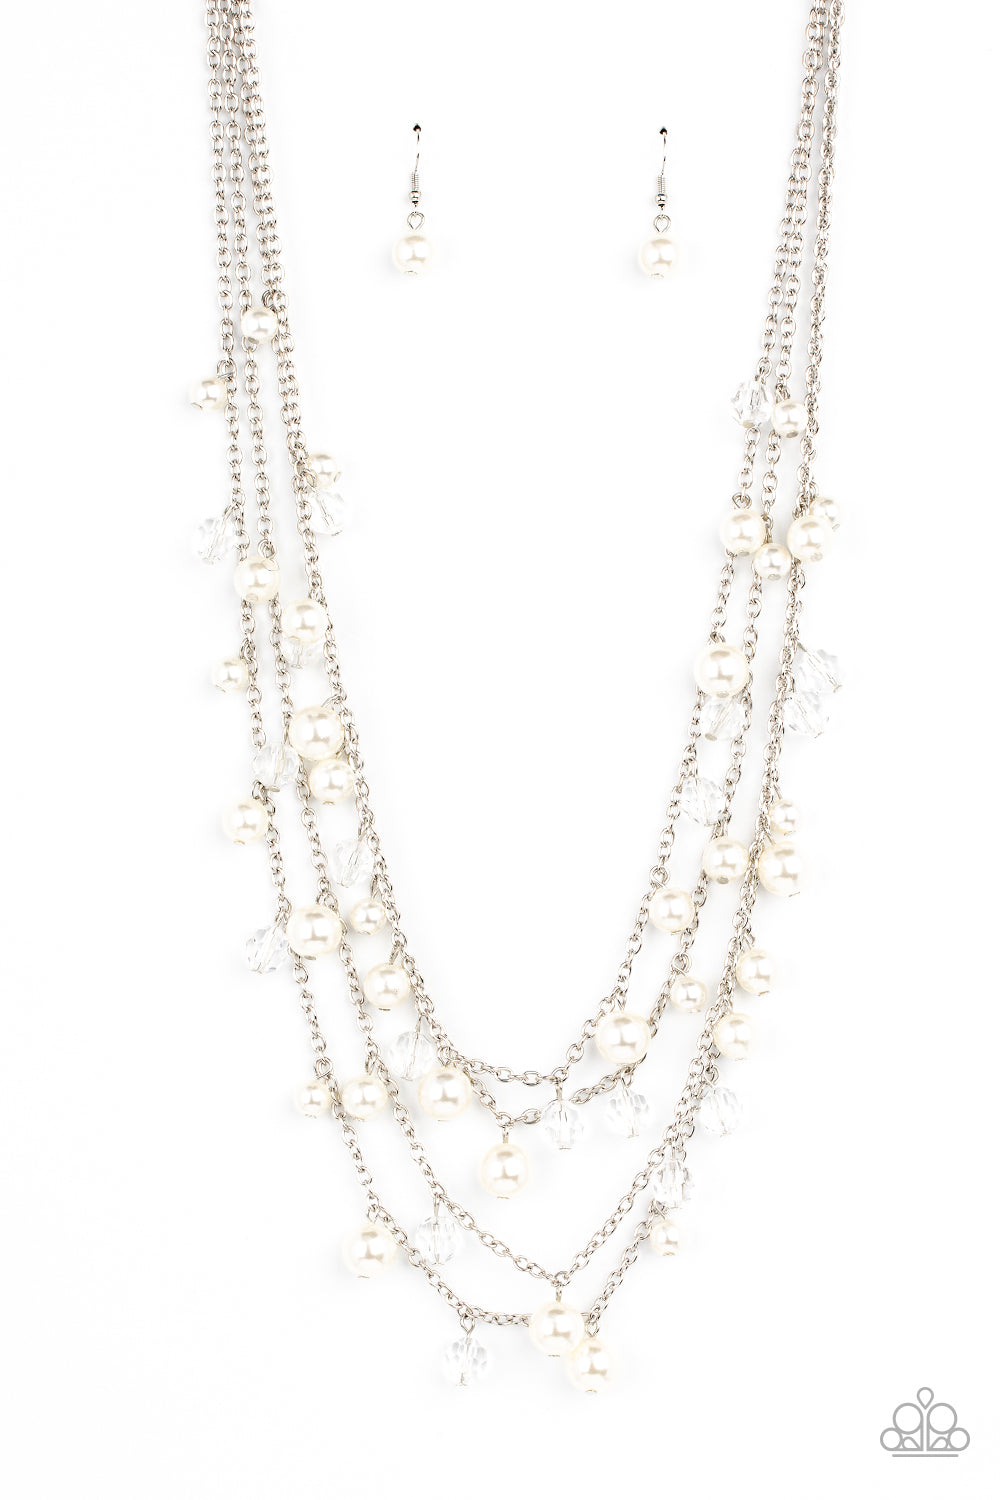 Vintage Virtuoso - White Pearl and Silver Necklace - Paparazzi Accessories - Row after row of bubbly white pearls and glittery crystal-like beads swing from layered silver chains across the chest, creating a noise-making display. Features an adjustable clasp closure. Sold as one individual necklace.